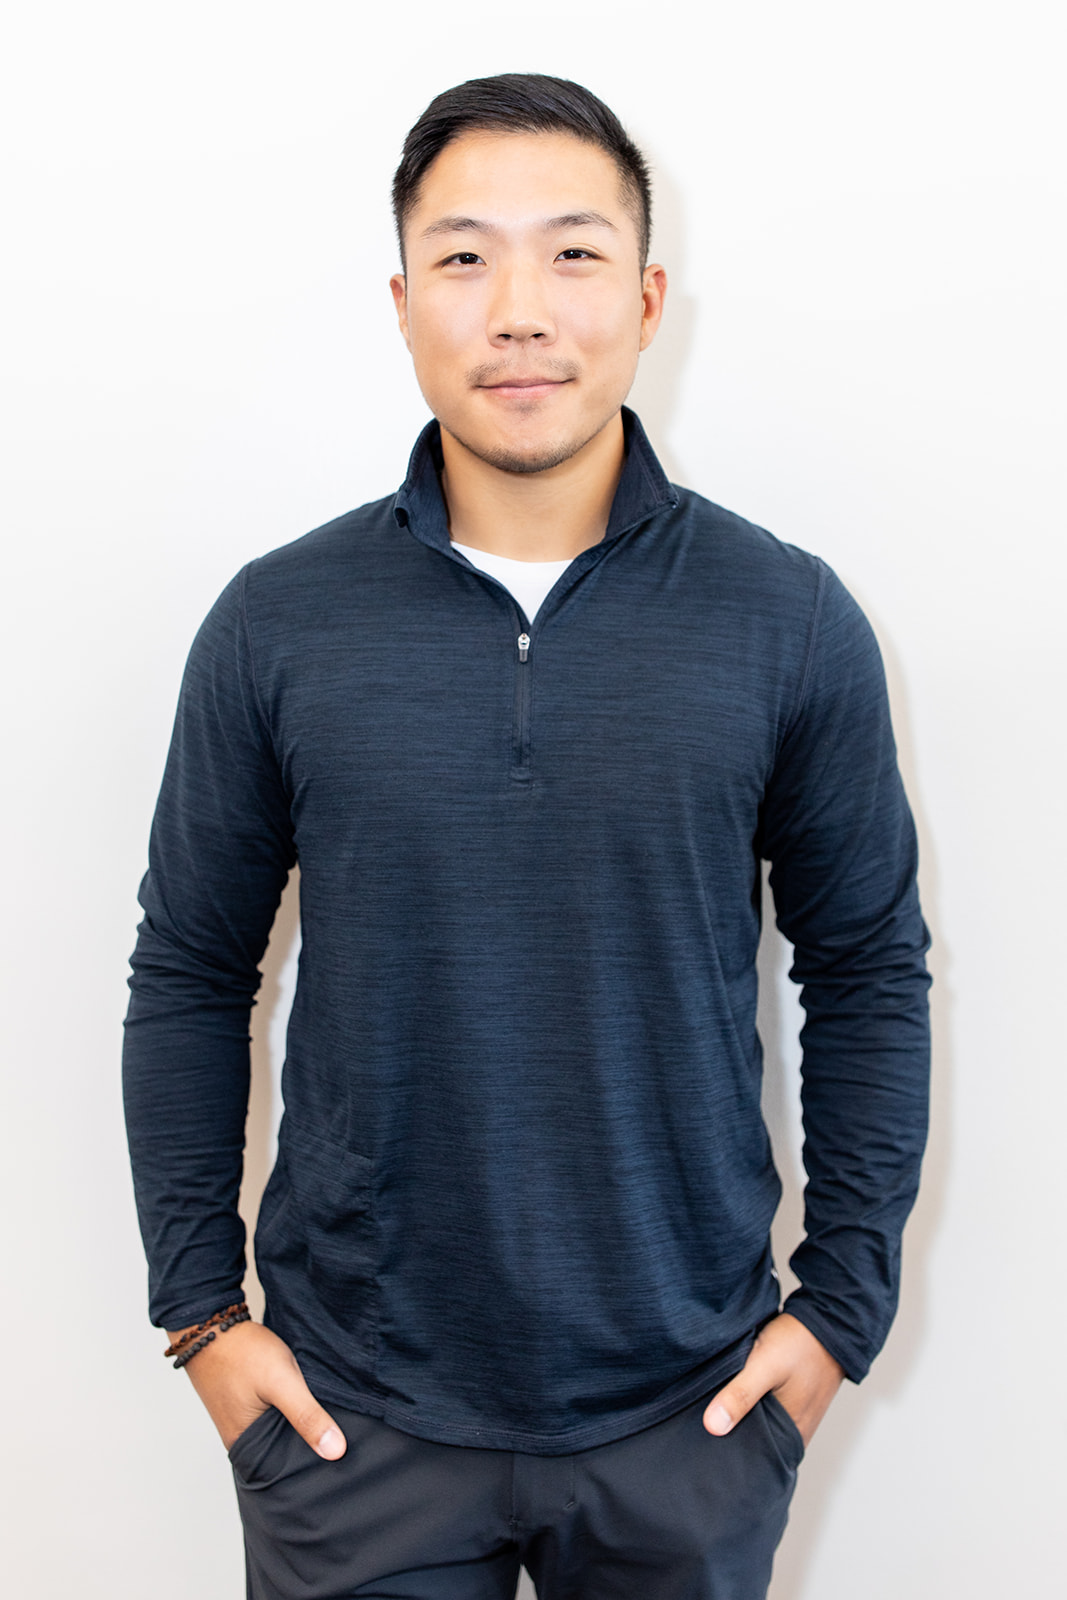 Dr. Samuel Kim biography photo, physical therapist at PRIME Physical Therapy